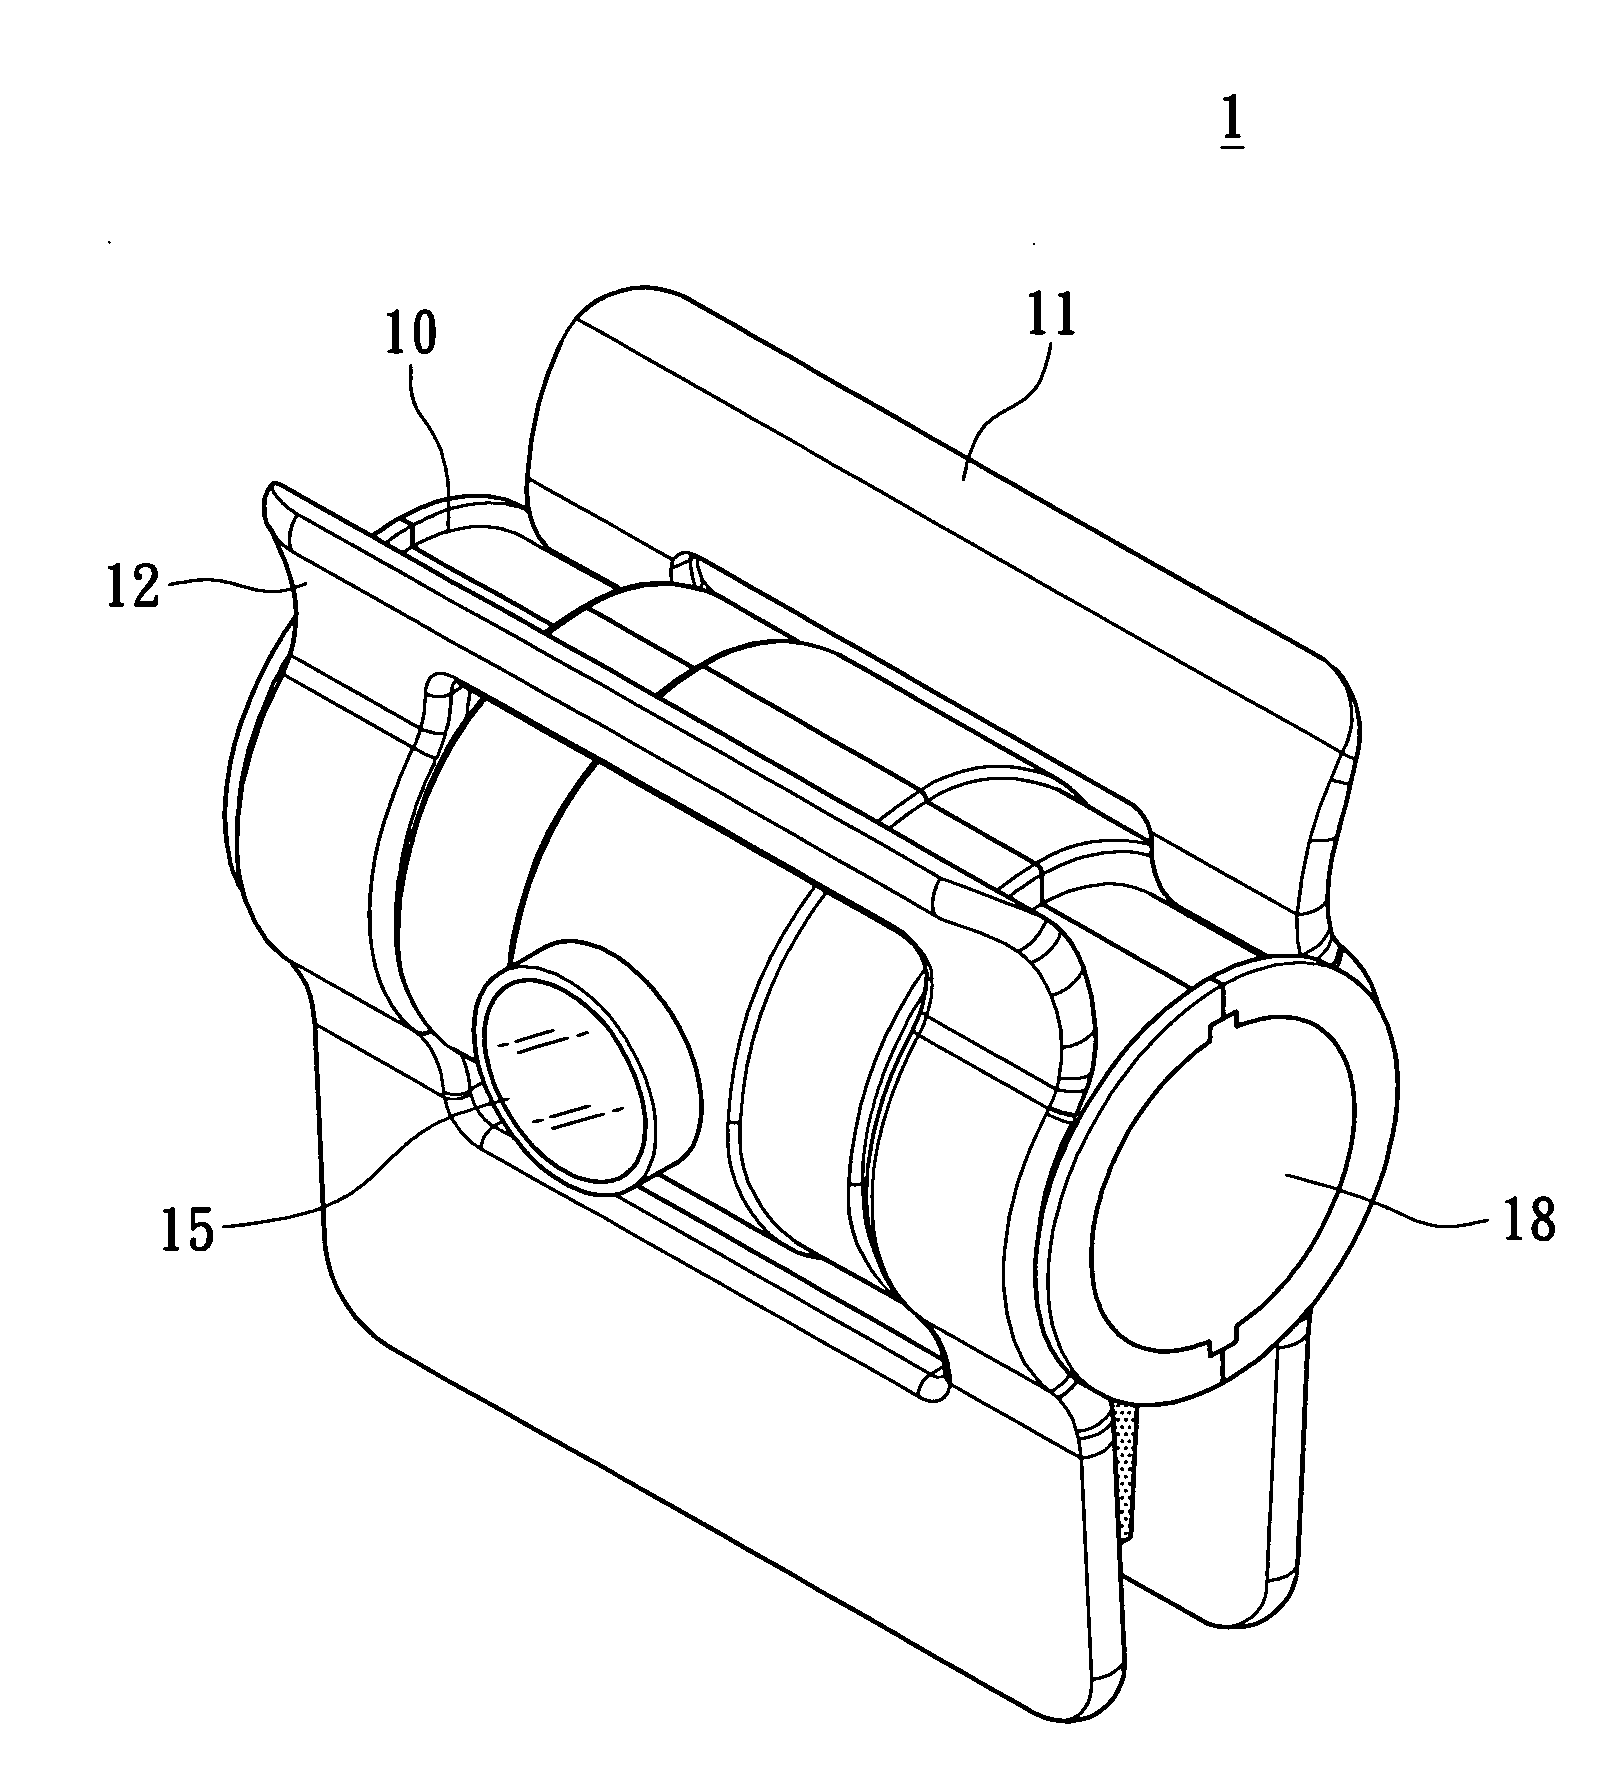 Webcam module having a clamping device